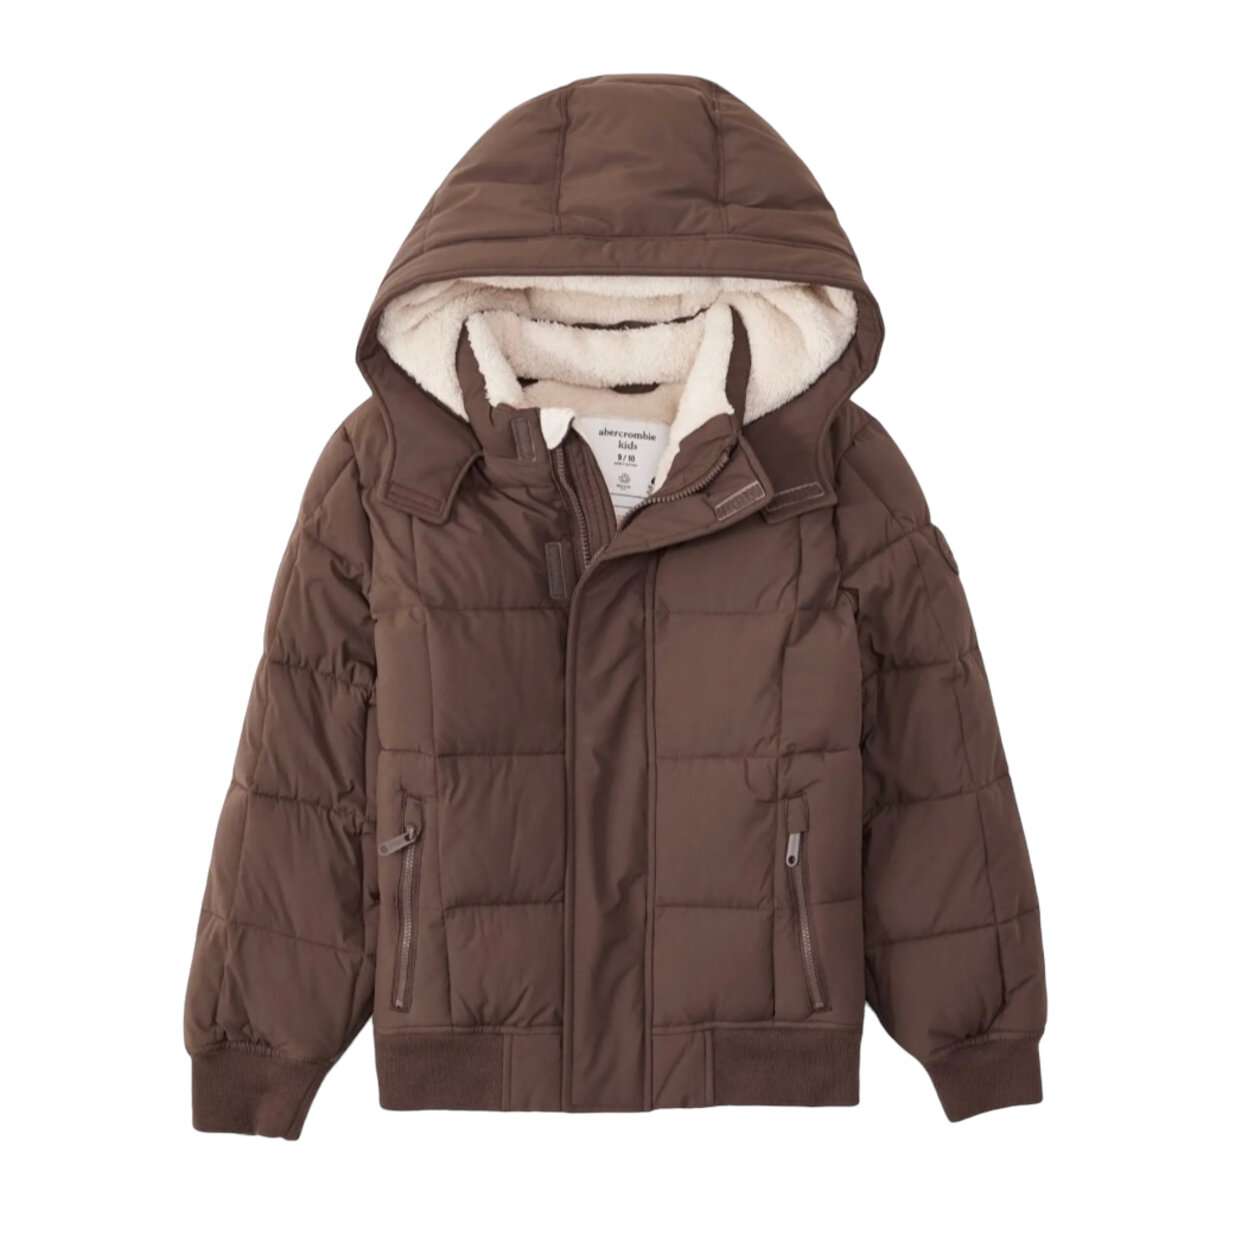 Abercrombie And Fitch Bubble Coat
